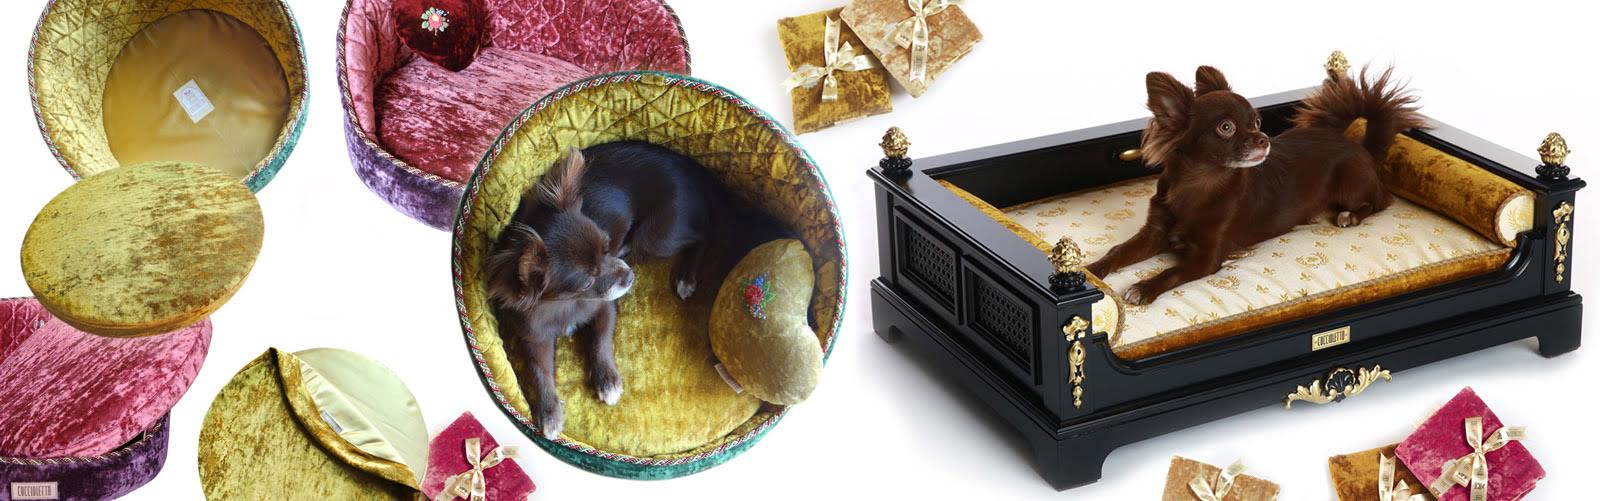 Luxury CuccioLetto's pet beds inspired in classic and contemporary patterns coordinate beautifully with home décor...